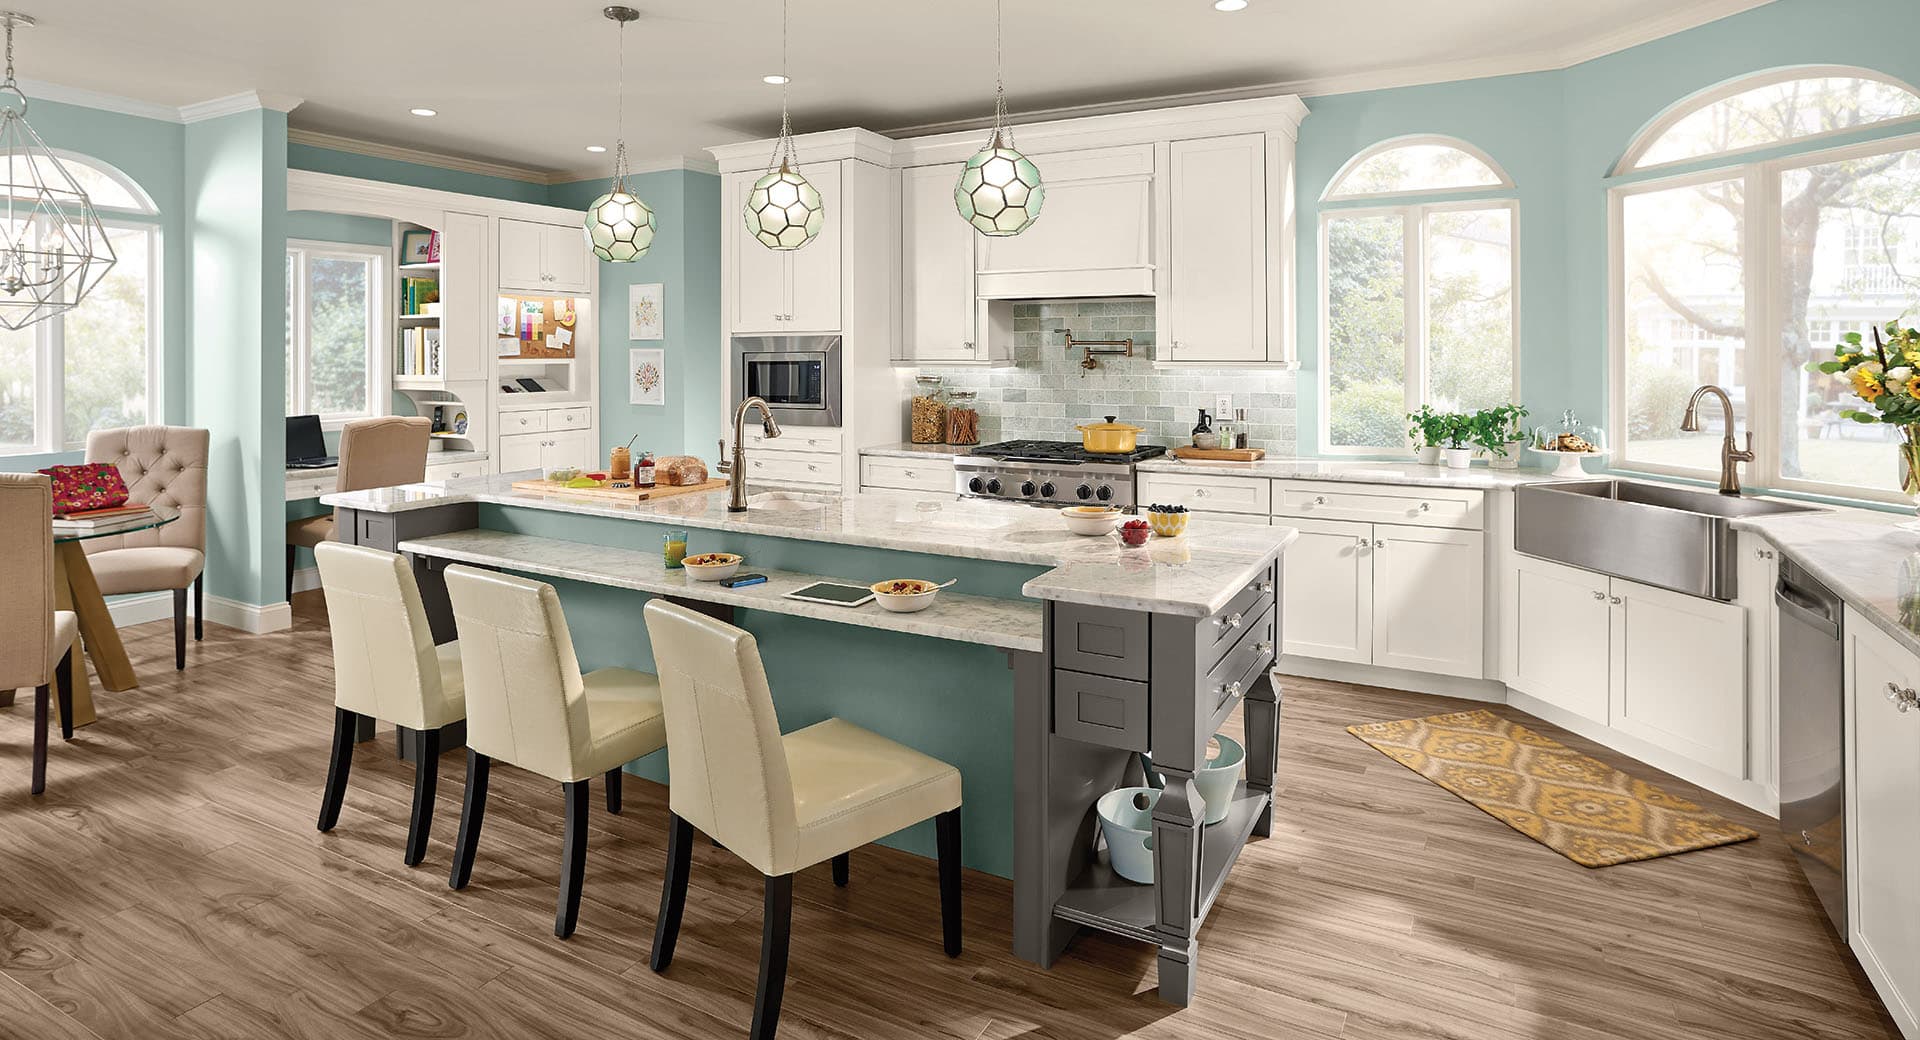 Bella Casa Cabinetry - Bunnell, FL, US, labor cost to remodel kitchen